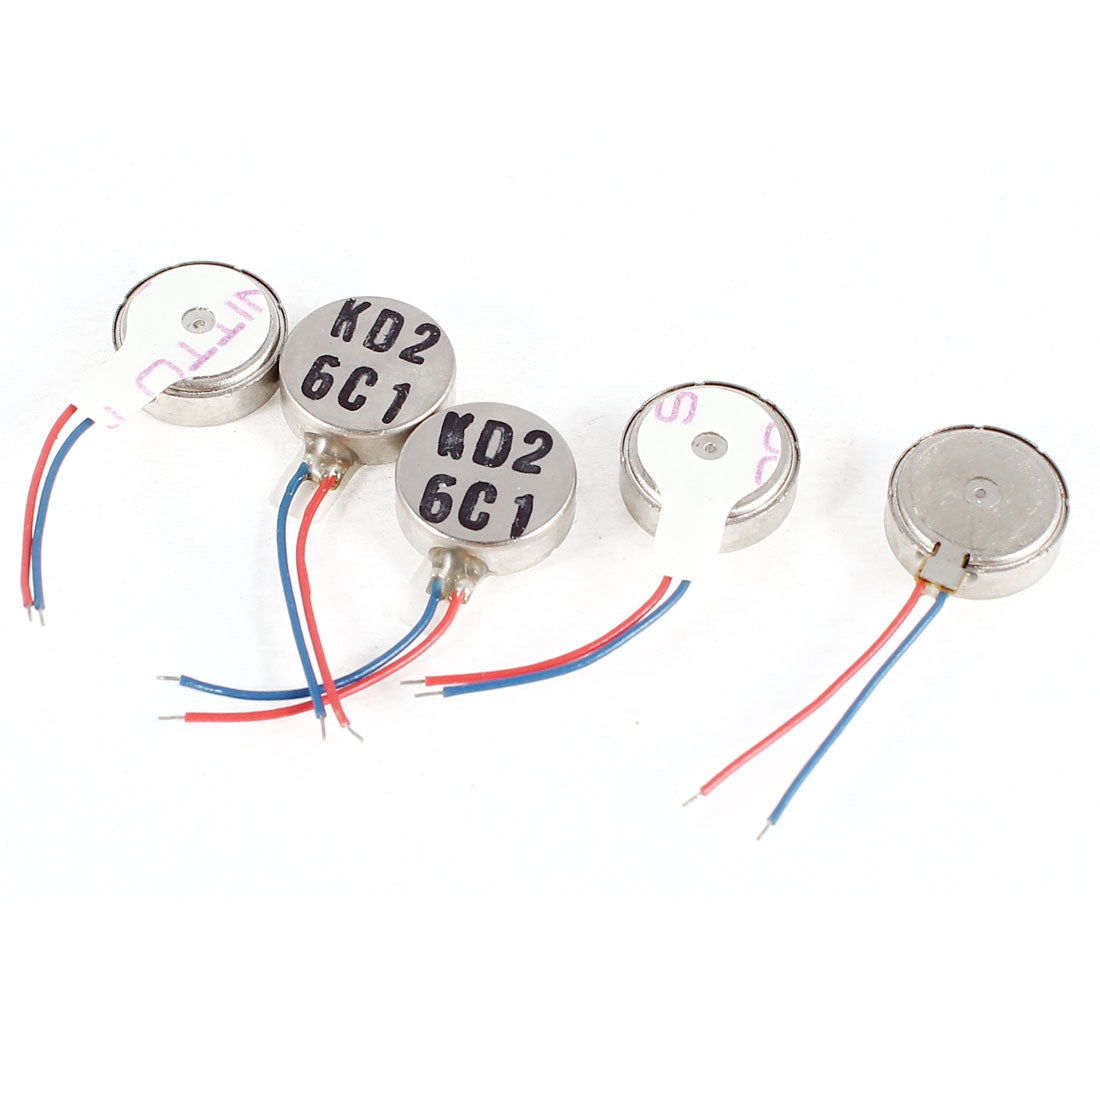 uxcell Uxcell 5 Pcs DC 3V 10mm x 3.6mm 1034 Cell Phone Coin Flat Vibrating Vibration Motor